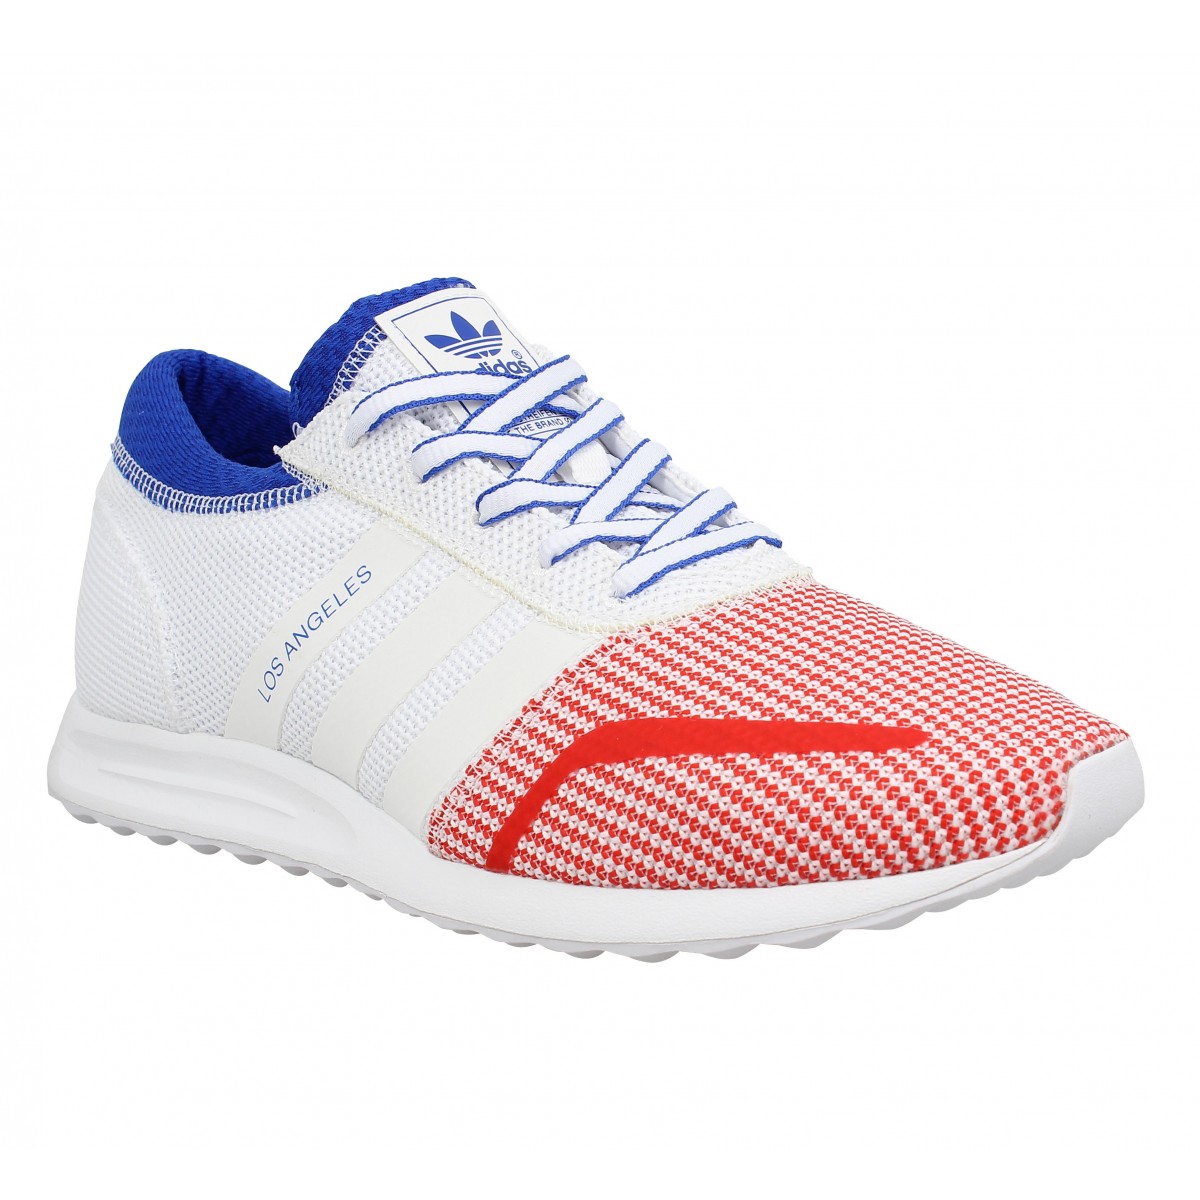 Adidas los angeles toile homme bleu blanc rouge | Fanny chaussures